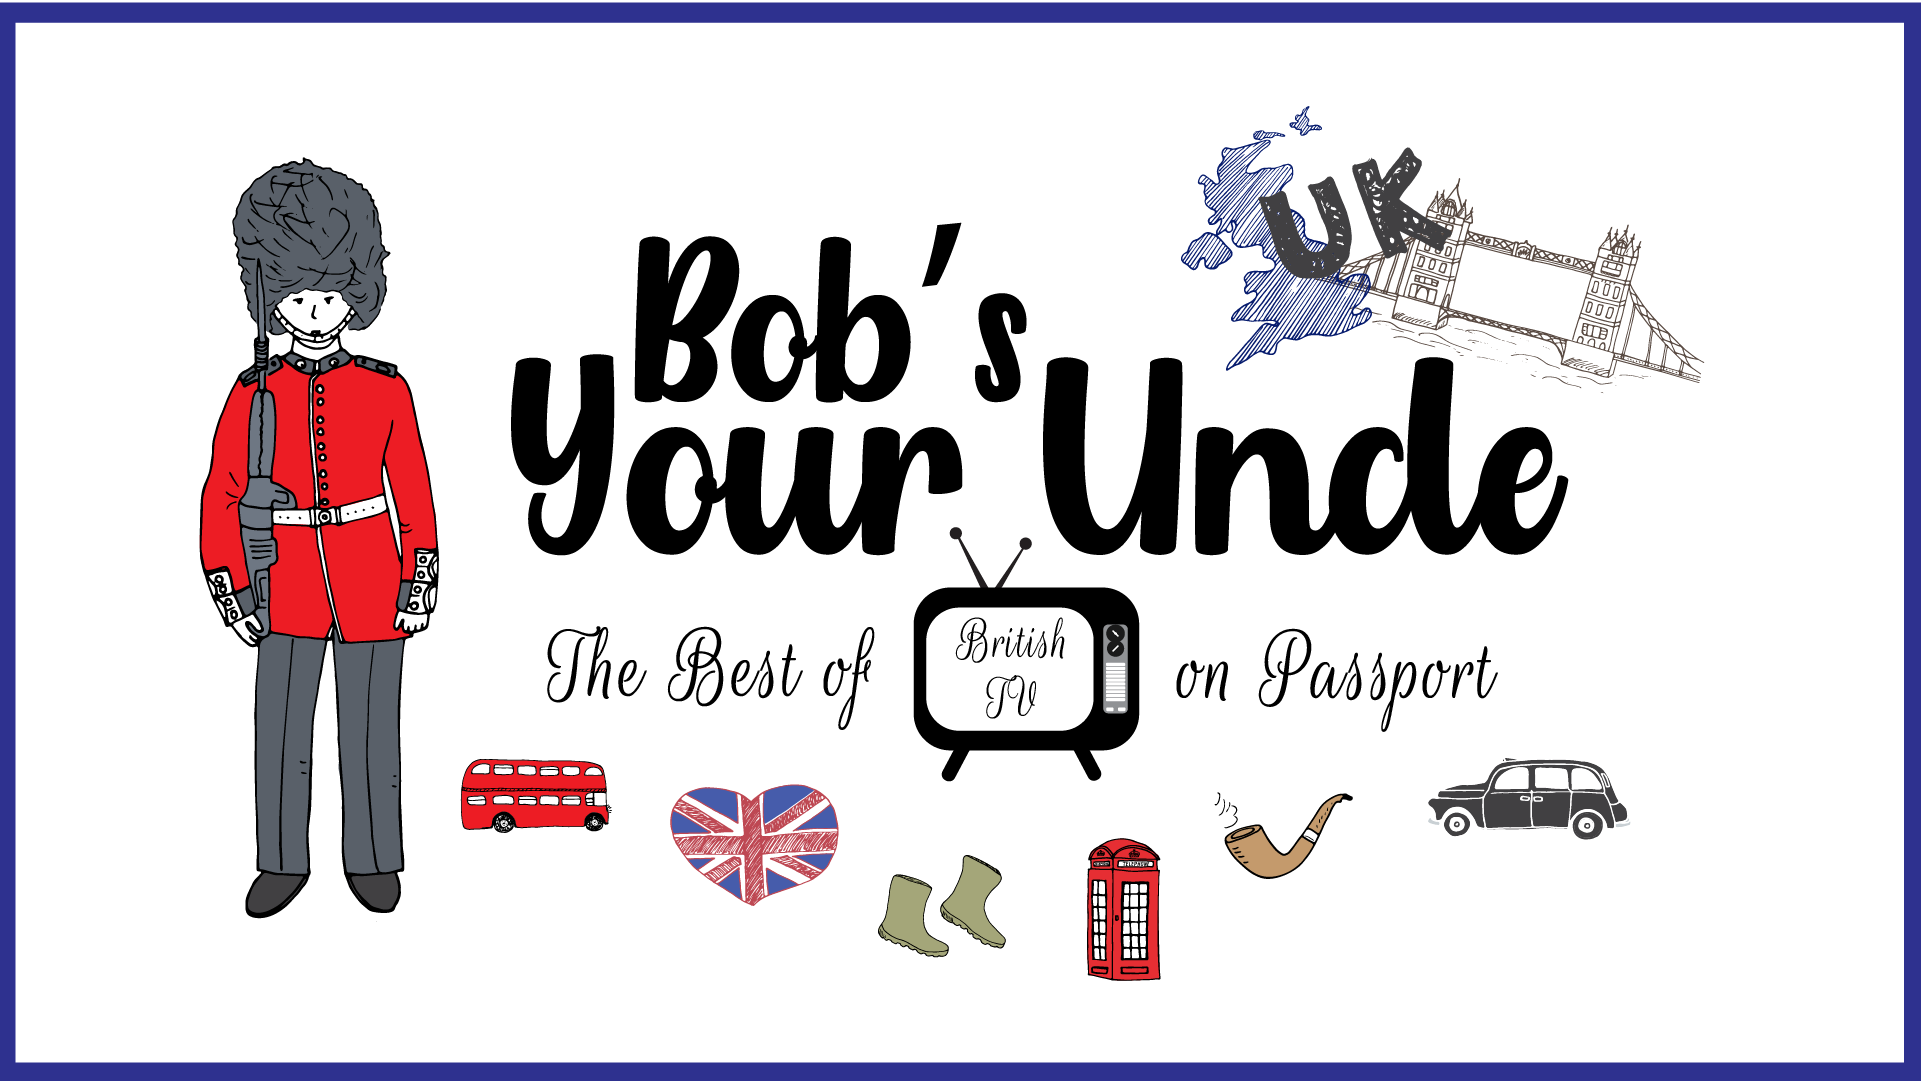 Bob's Your Uncle: The Best of British TV on Passport with several British icons on the page.